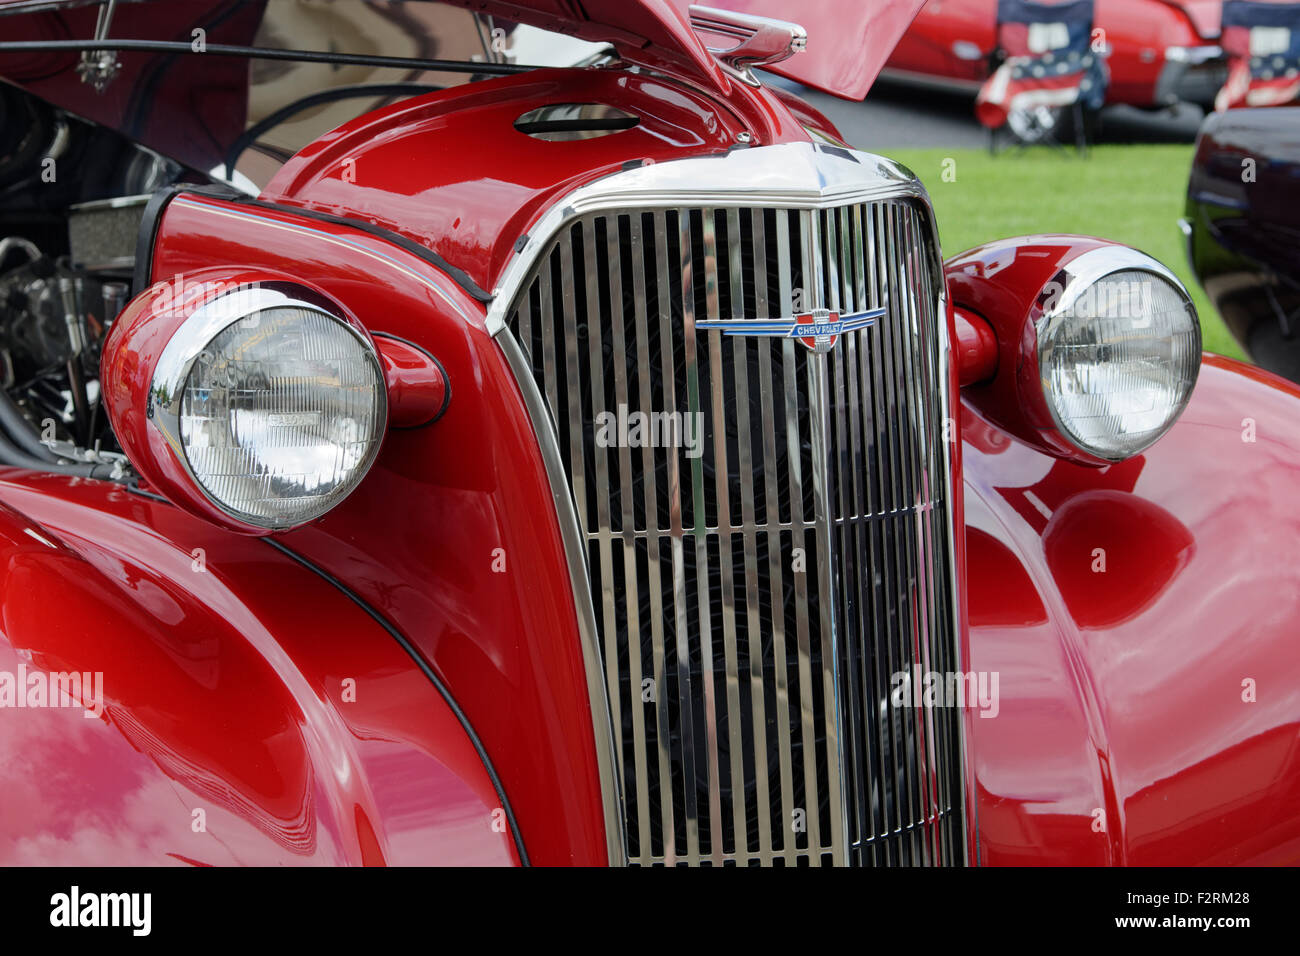 Red Chrysler automobile with hood panels raised, seen at an antique car show. Stock Photo